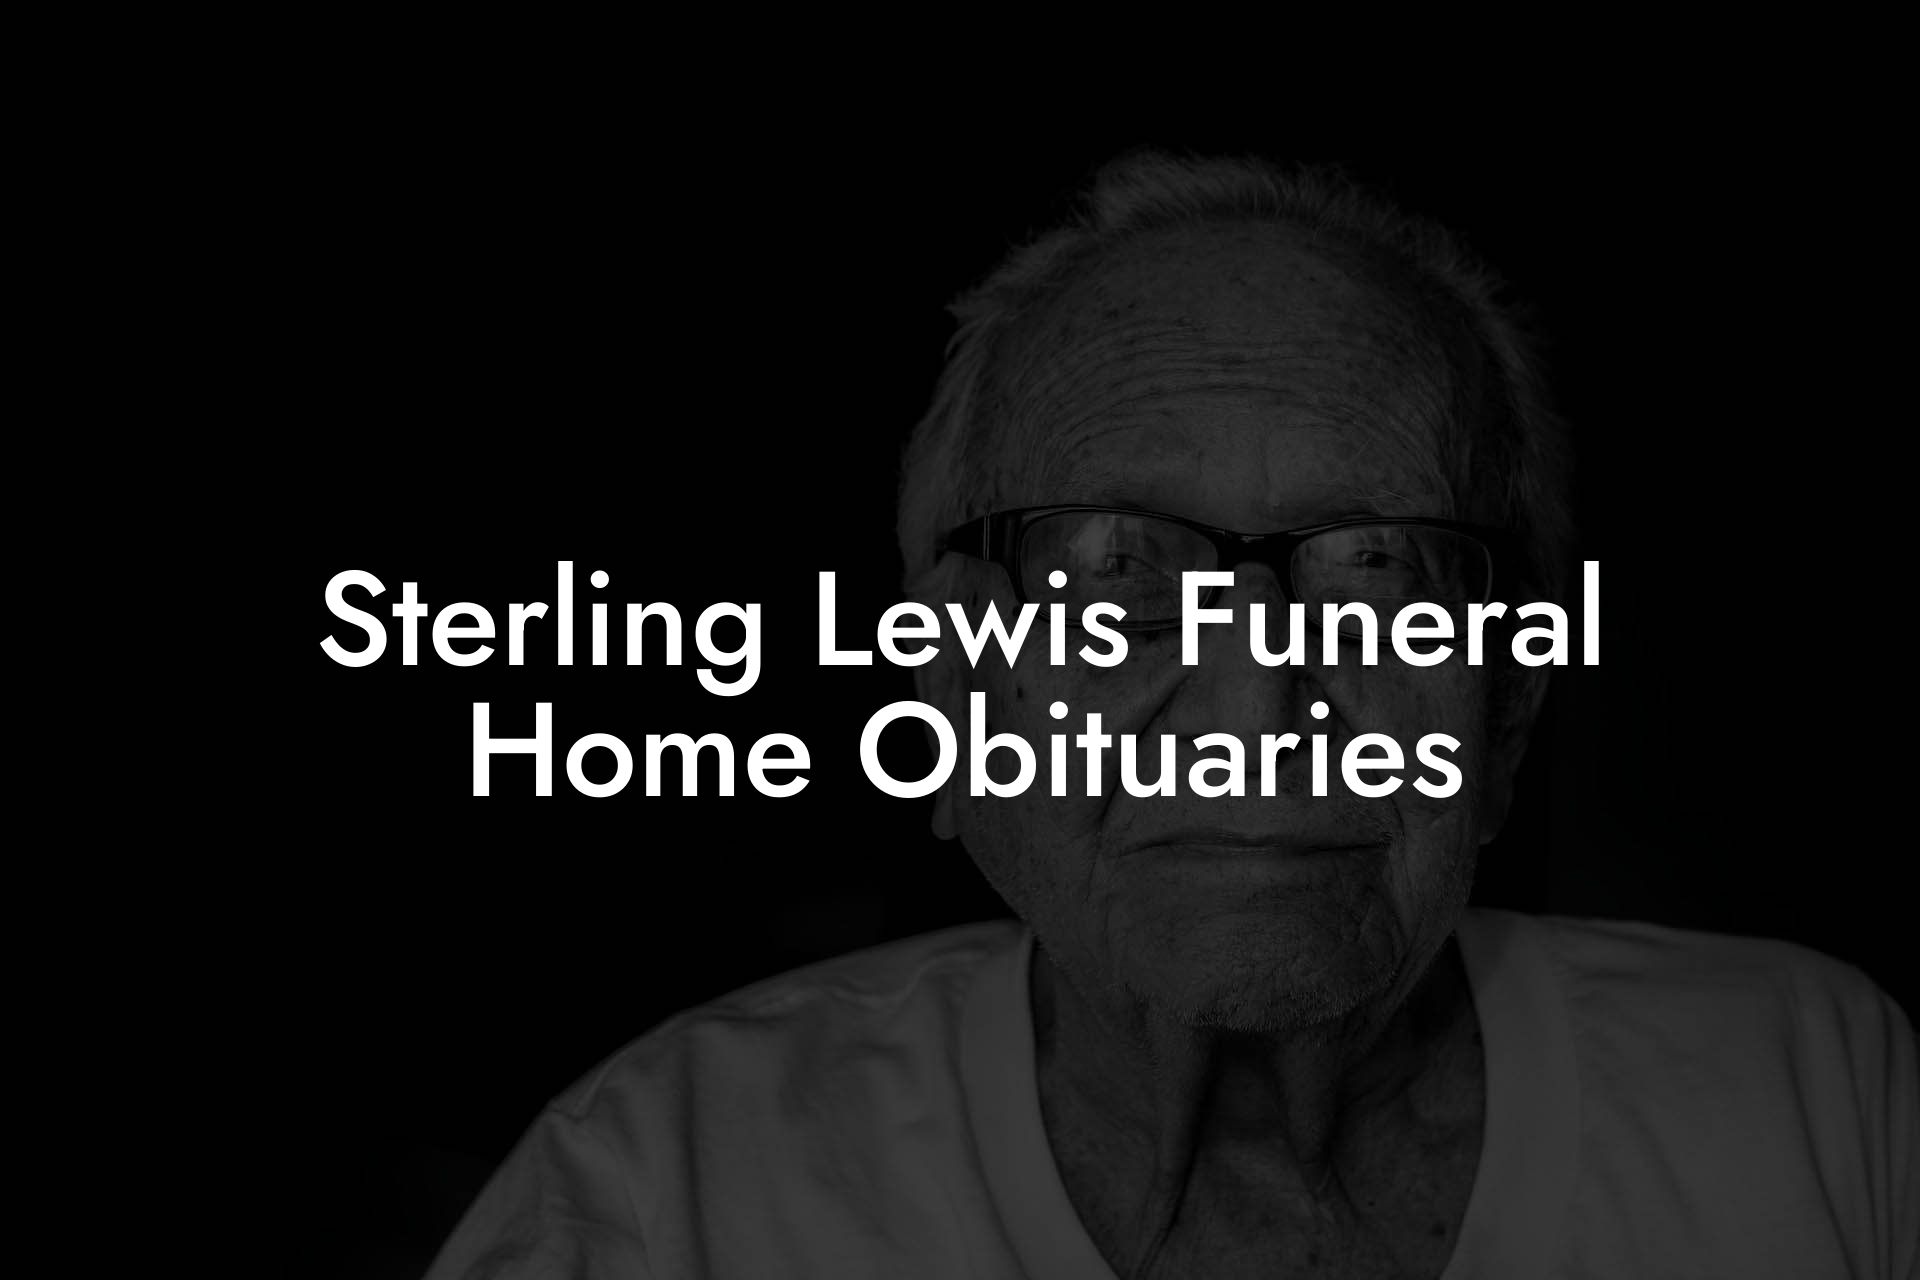 Sterling Lewis Funeral Home Obituaries